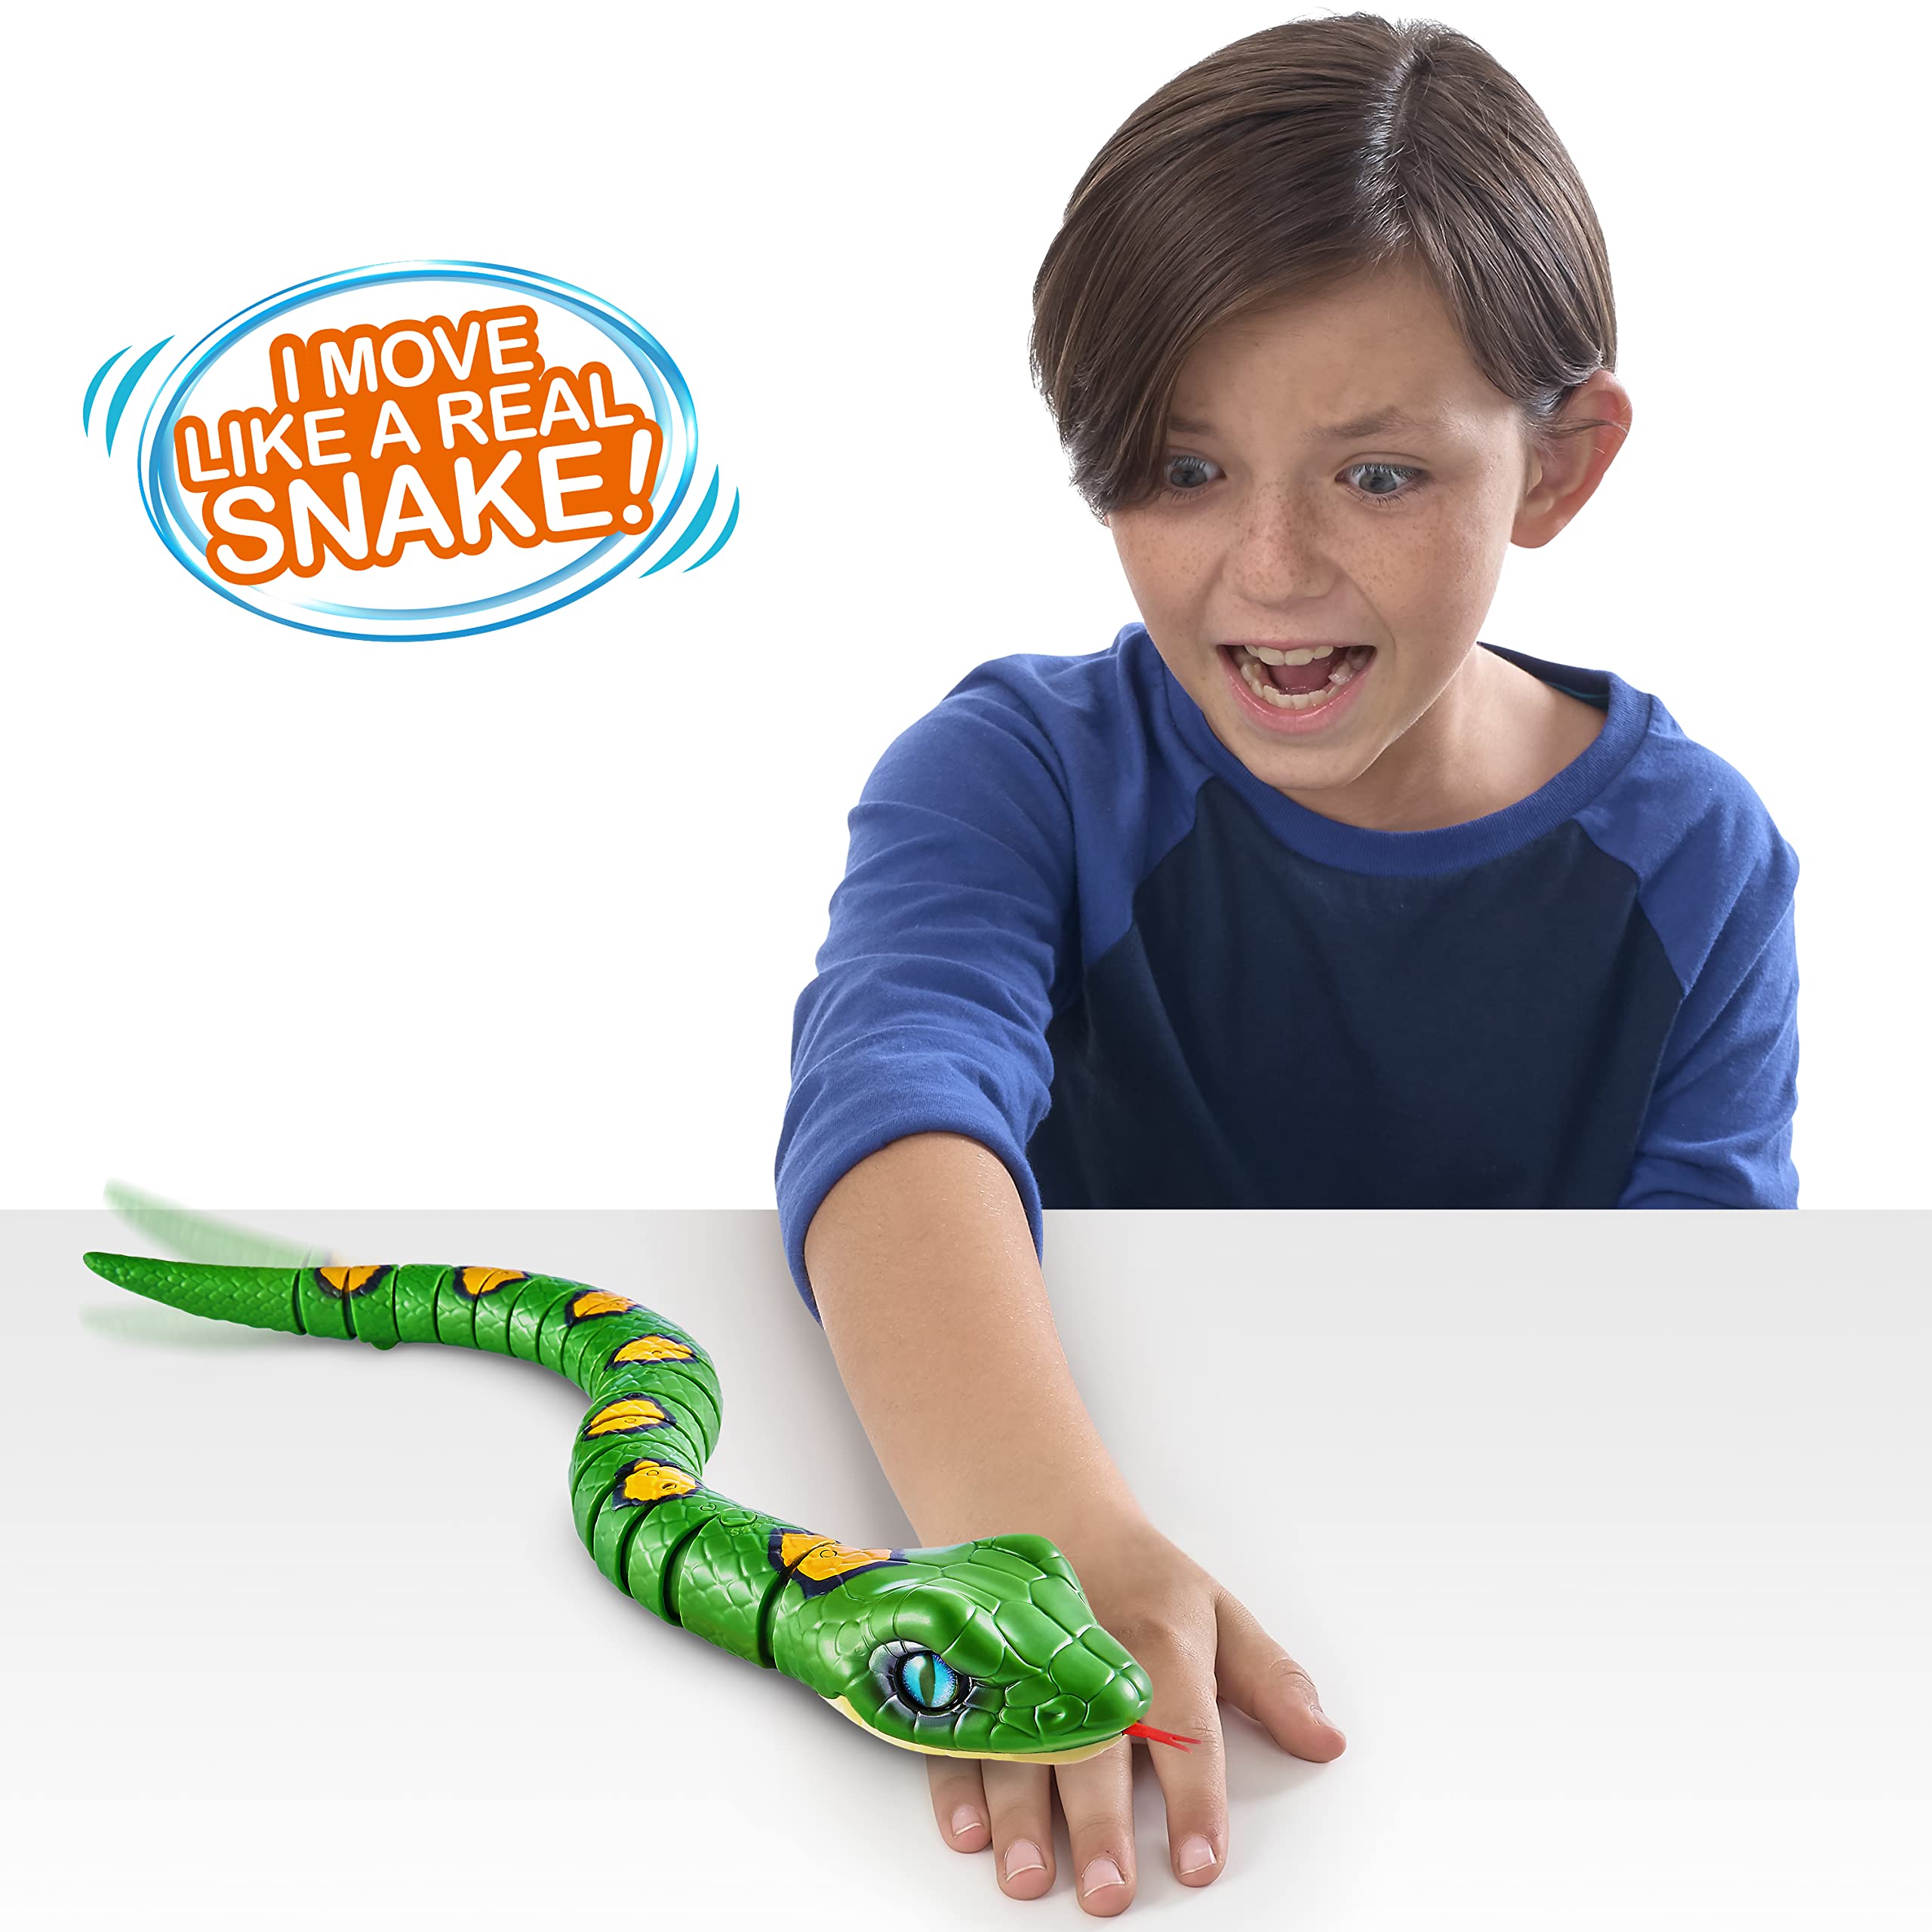 Robo Alive Snake + Lizard Series 3 by ZURU Battery-Powered Robotic Light Up Interactive Electronic Reptile Toy That Moves